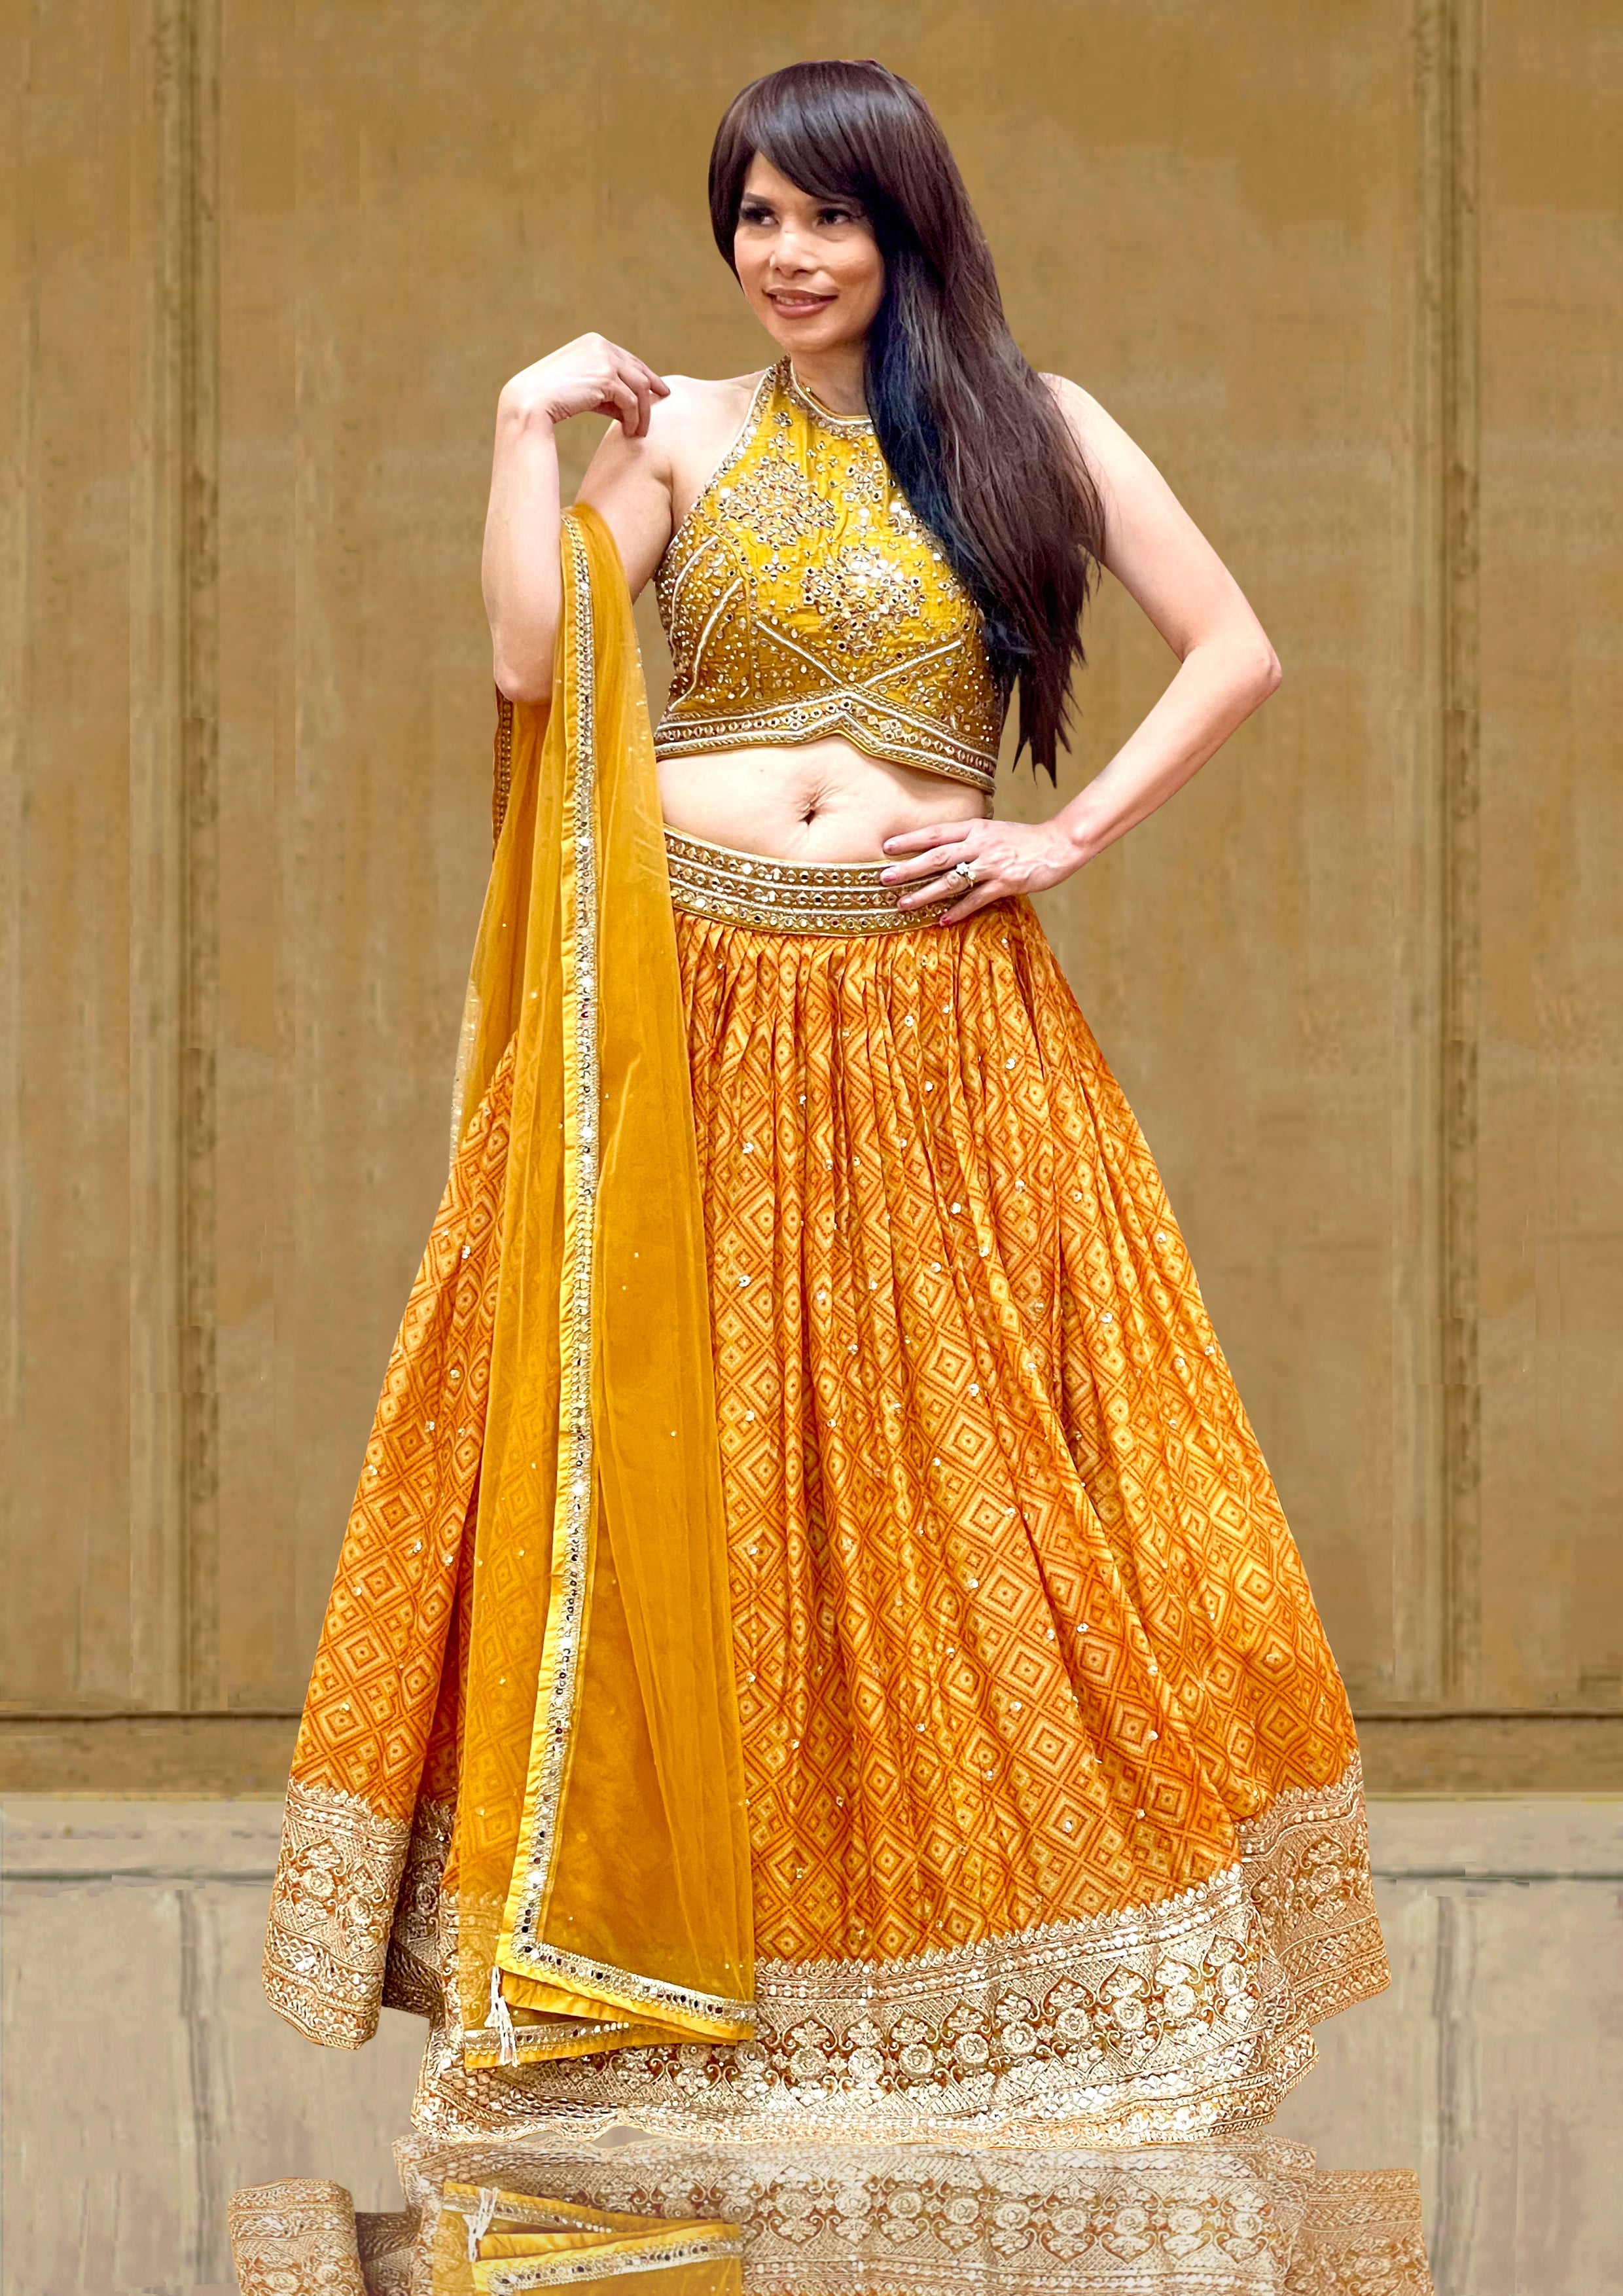 Stunning Indian Wedding Outfit Ideas